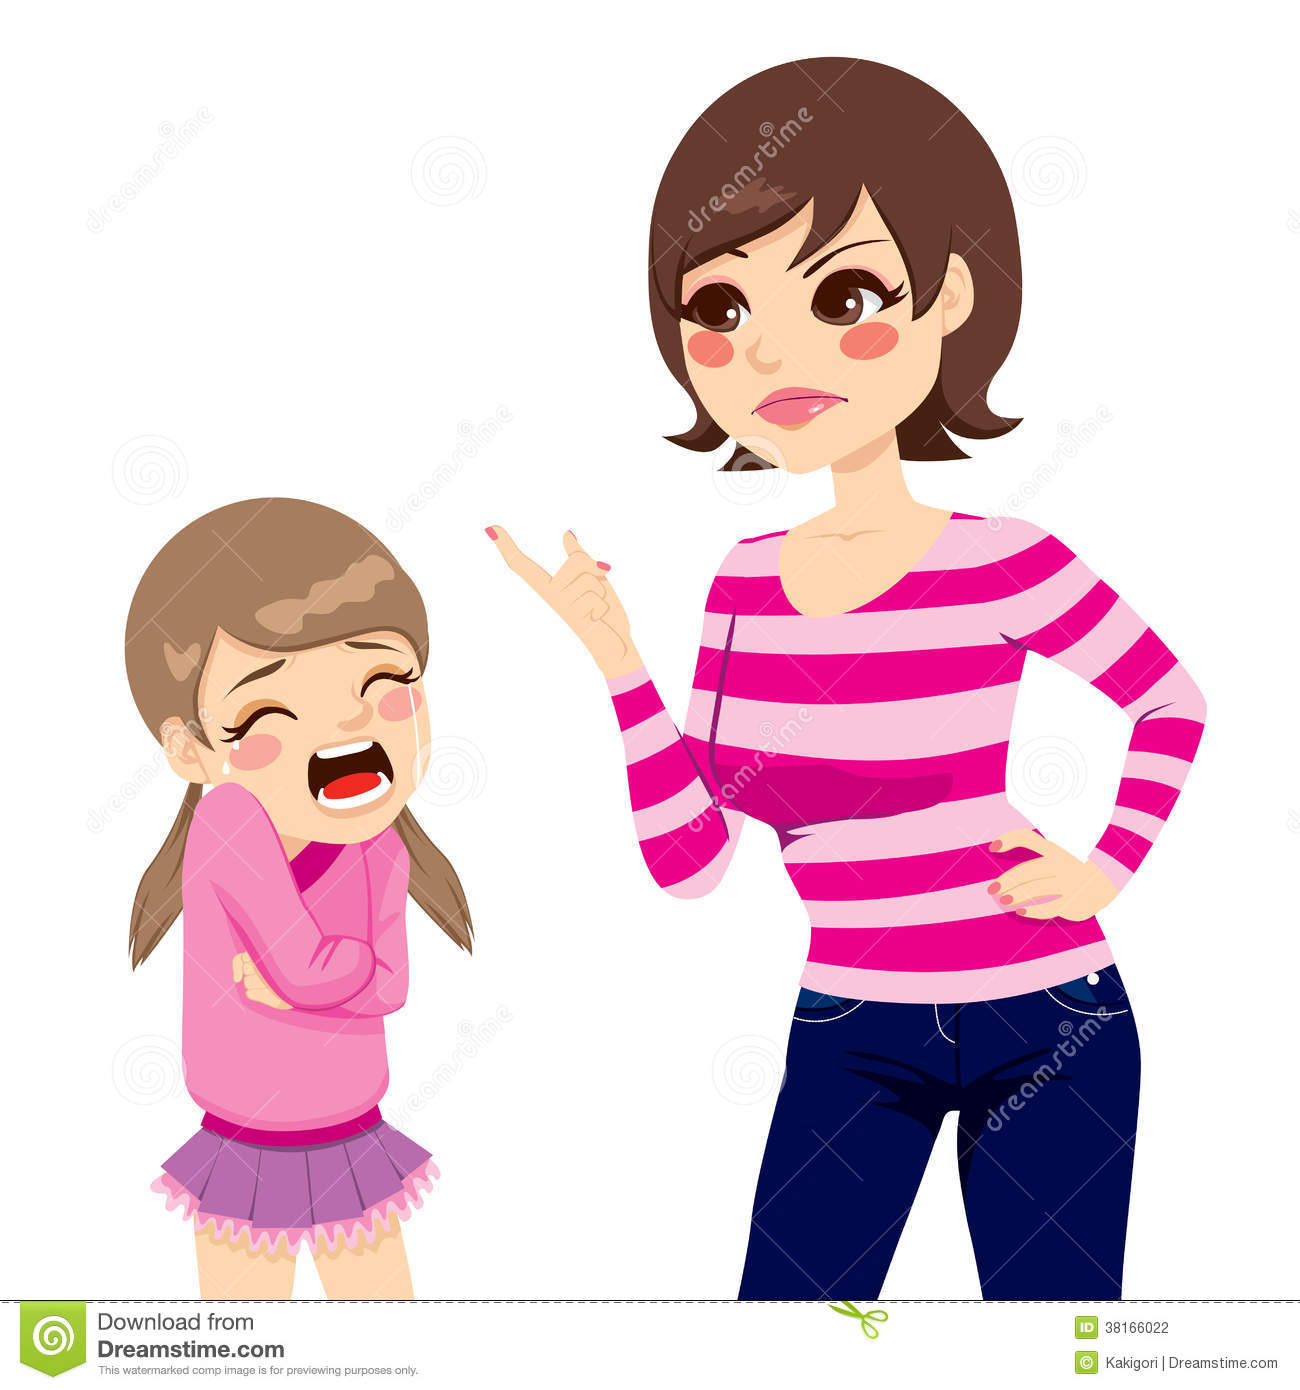 Illustration Of Upset Young Mother Scolding Little Crying Girl